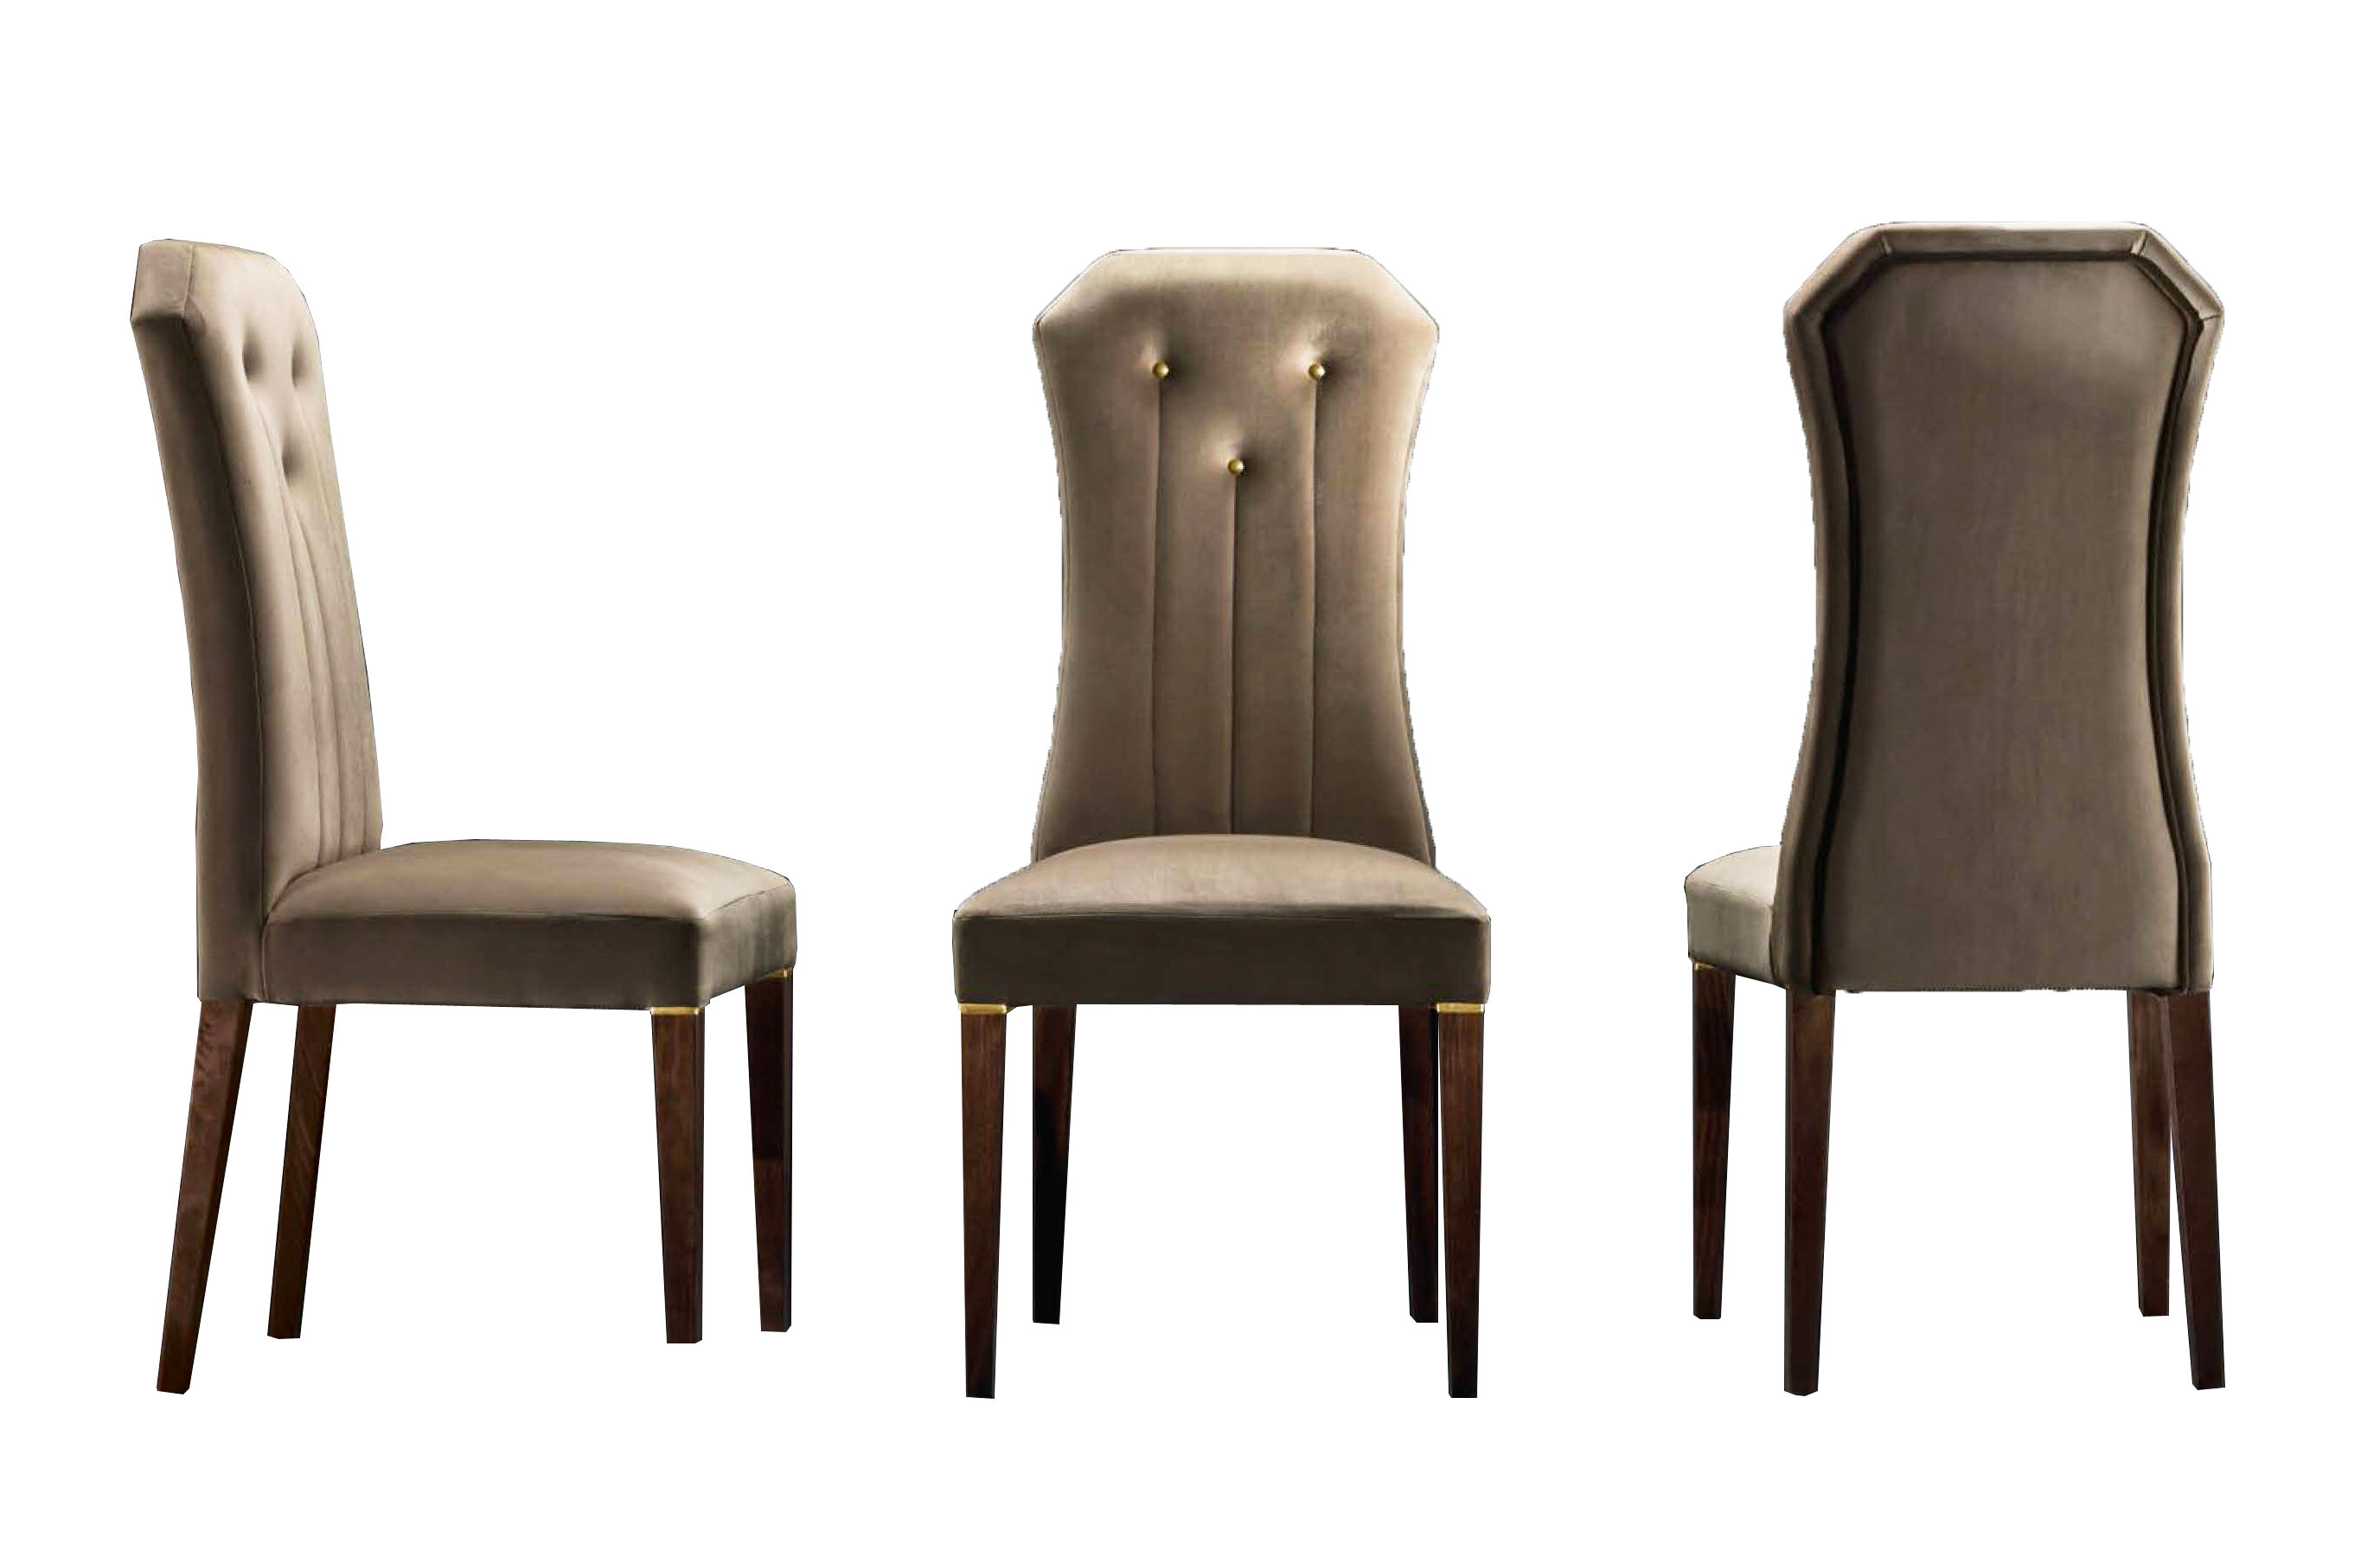 Brands Motif, Spain Diamante Dining Chair by Arredoclassic